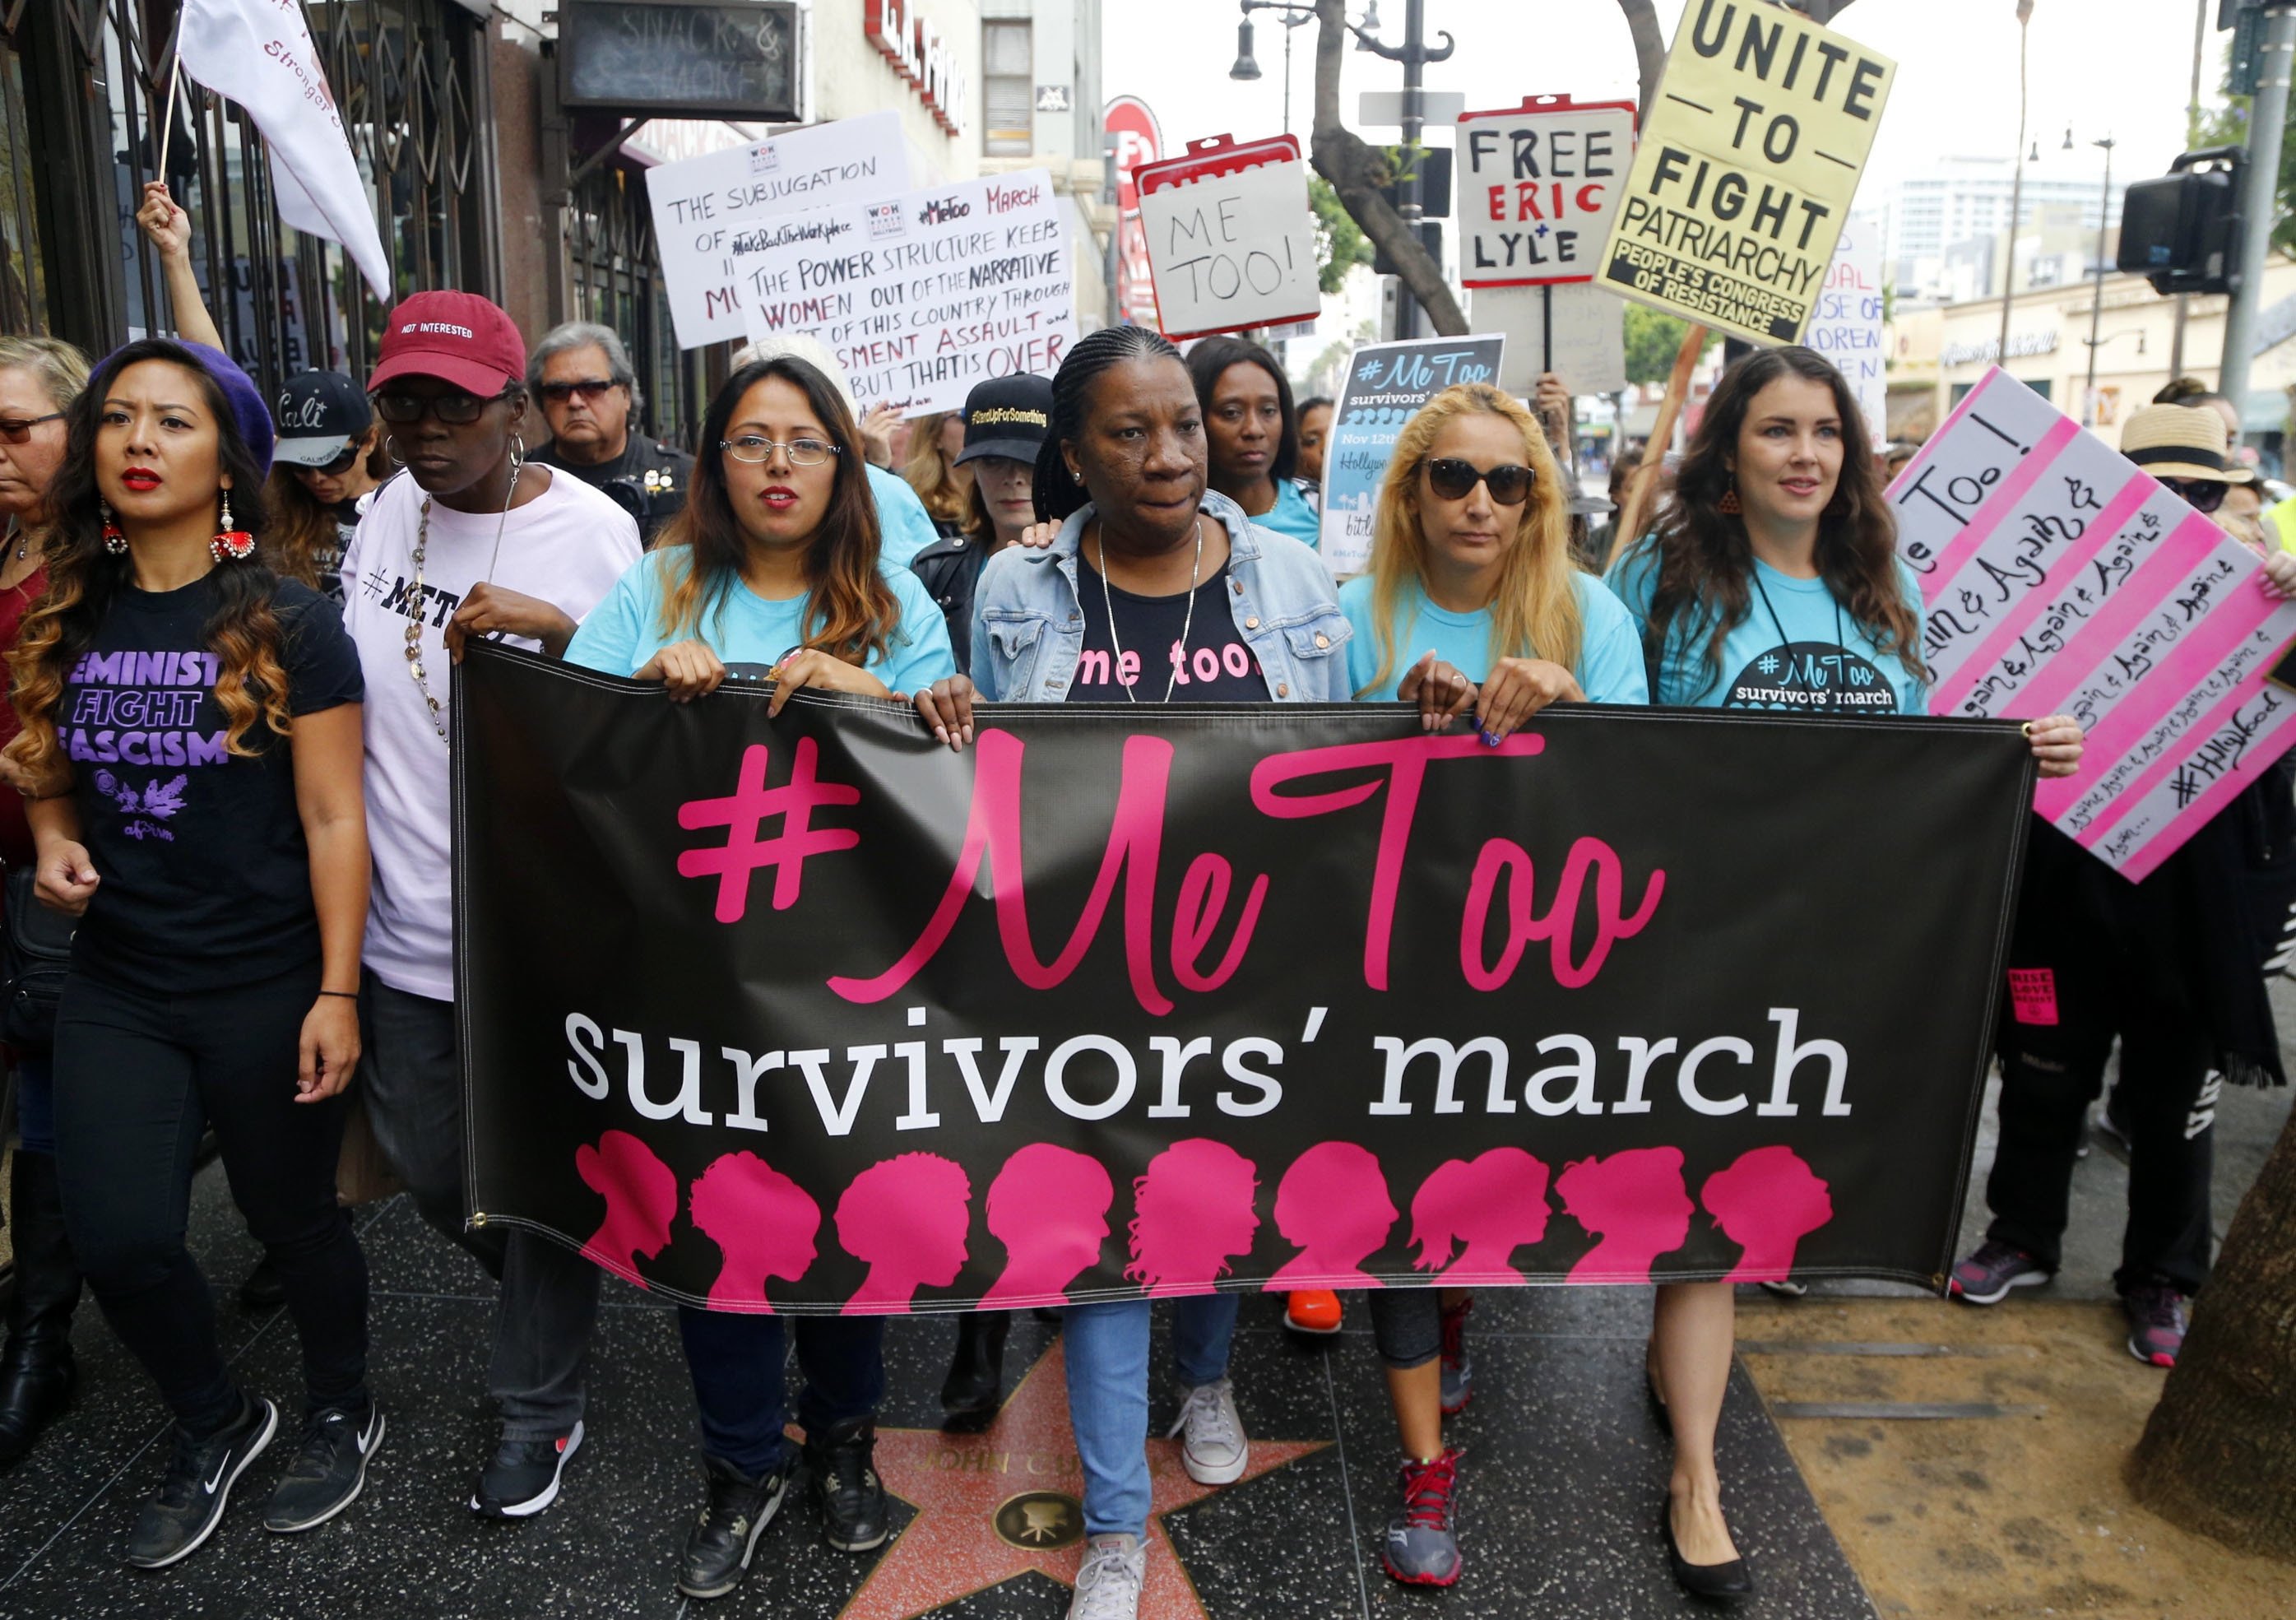 3 years on, #MeToo movement continues fight against sexual abuse,  harassment of women | Daily Sabah